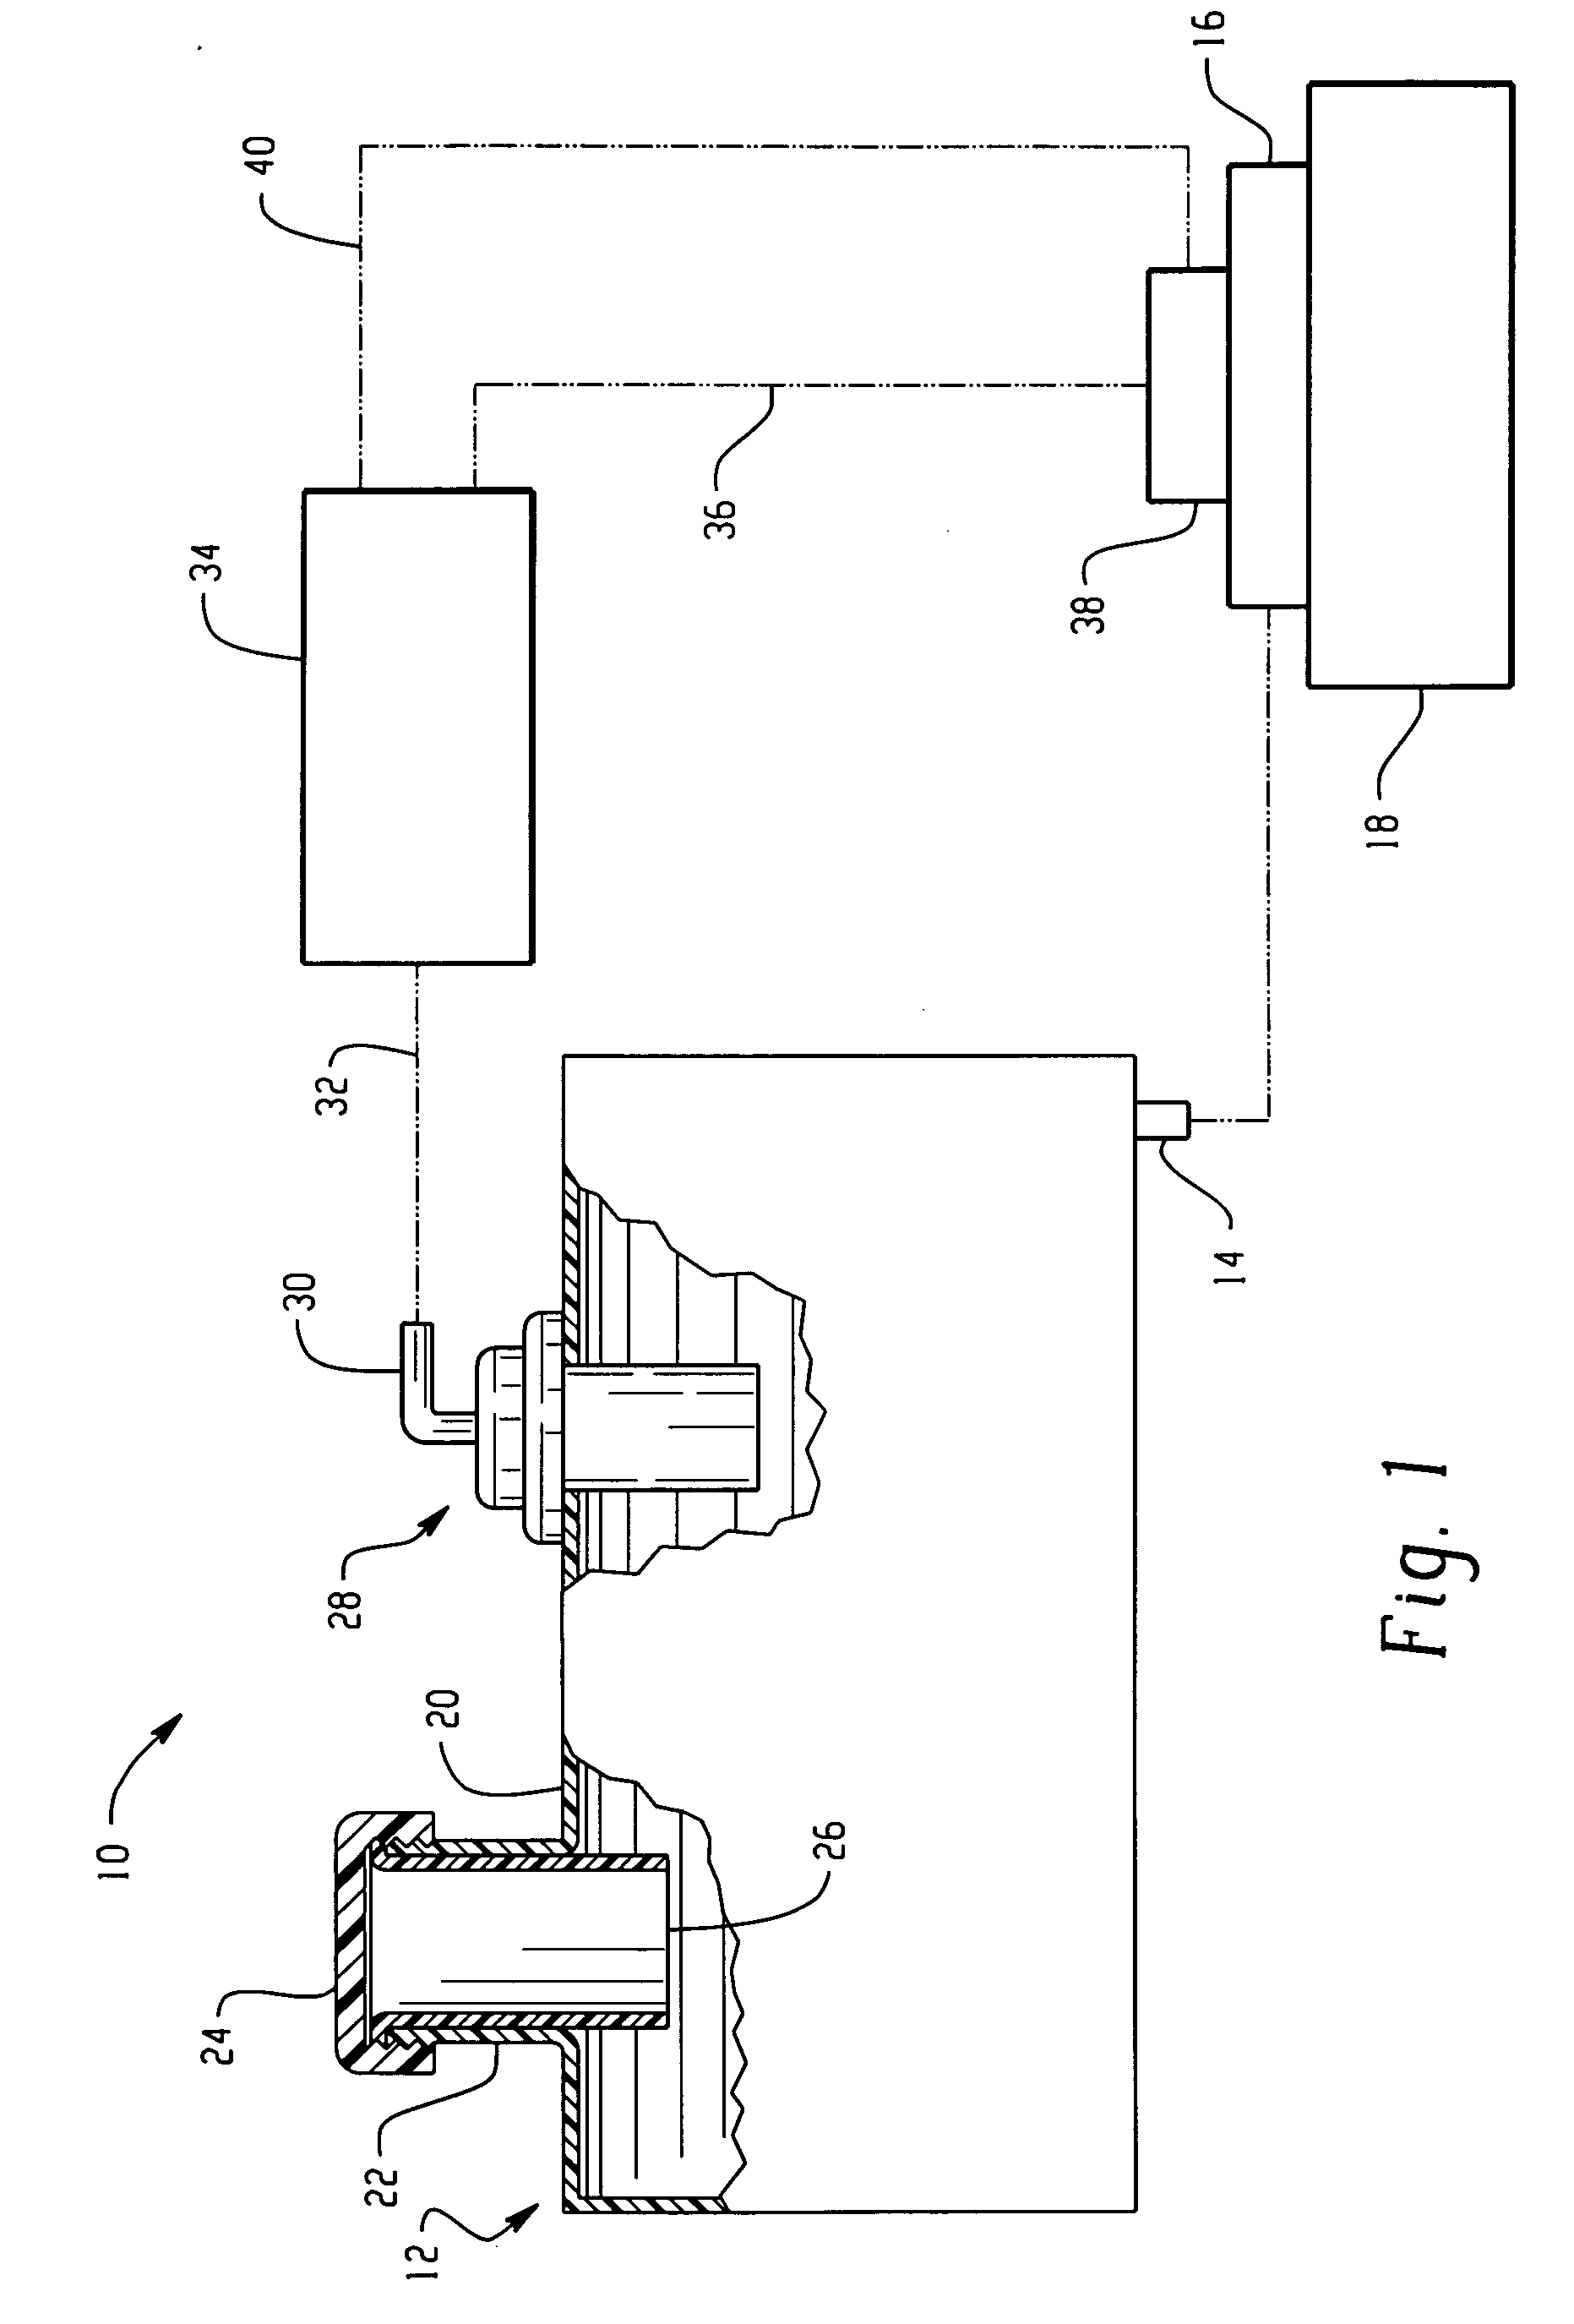 System and method for controlling fuel vapor emmission in a small engine